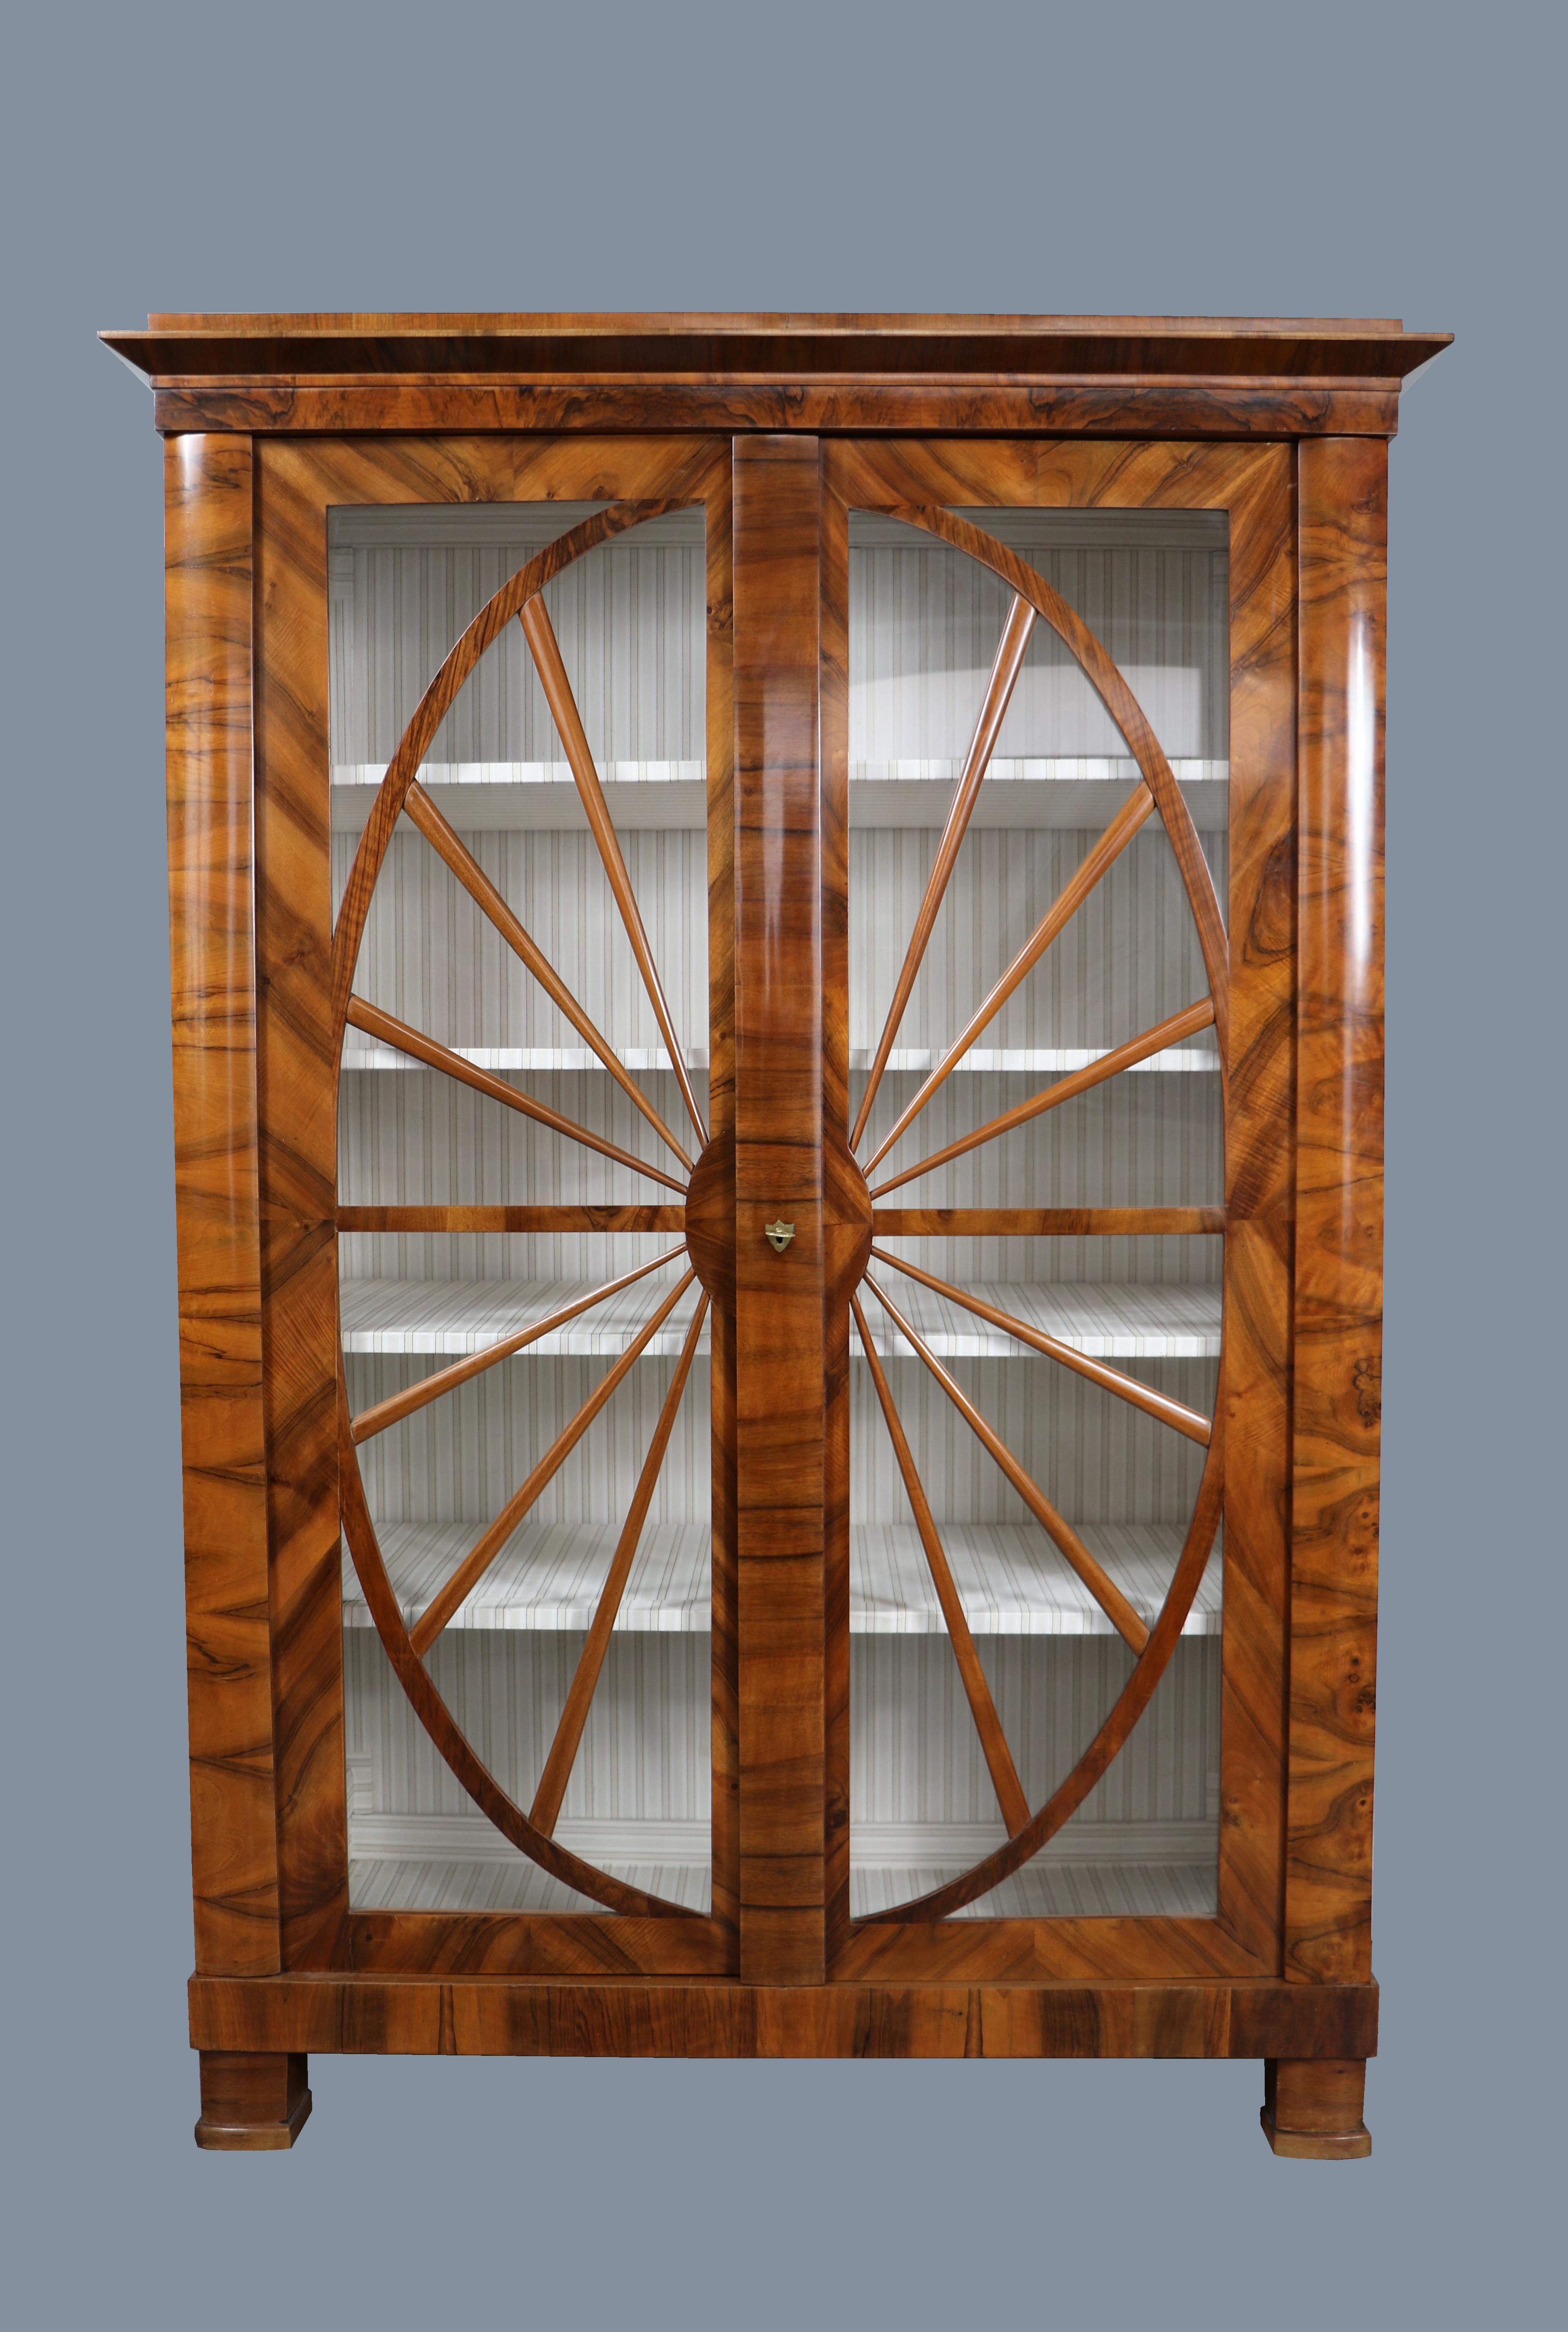 Hello,
We would like to offer you this truly exquisite, early Biedermeier walnut vitrine. The piece was made in Vienna circa 1825.

Viennese Biedermeier is distinguished by their sophisticated proportions, rare and refined design and excellent